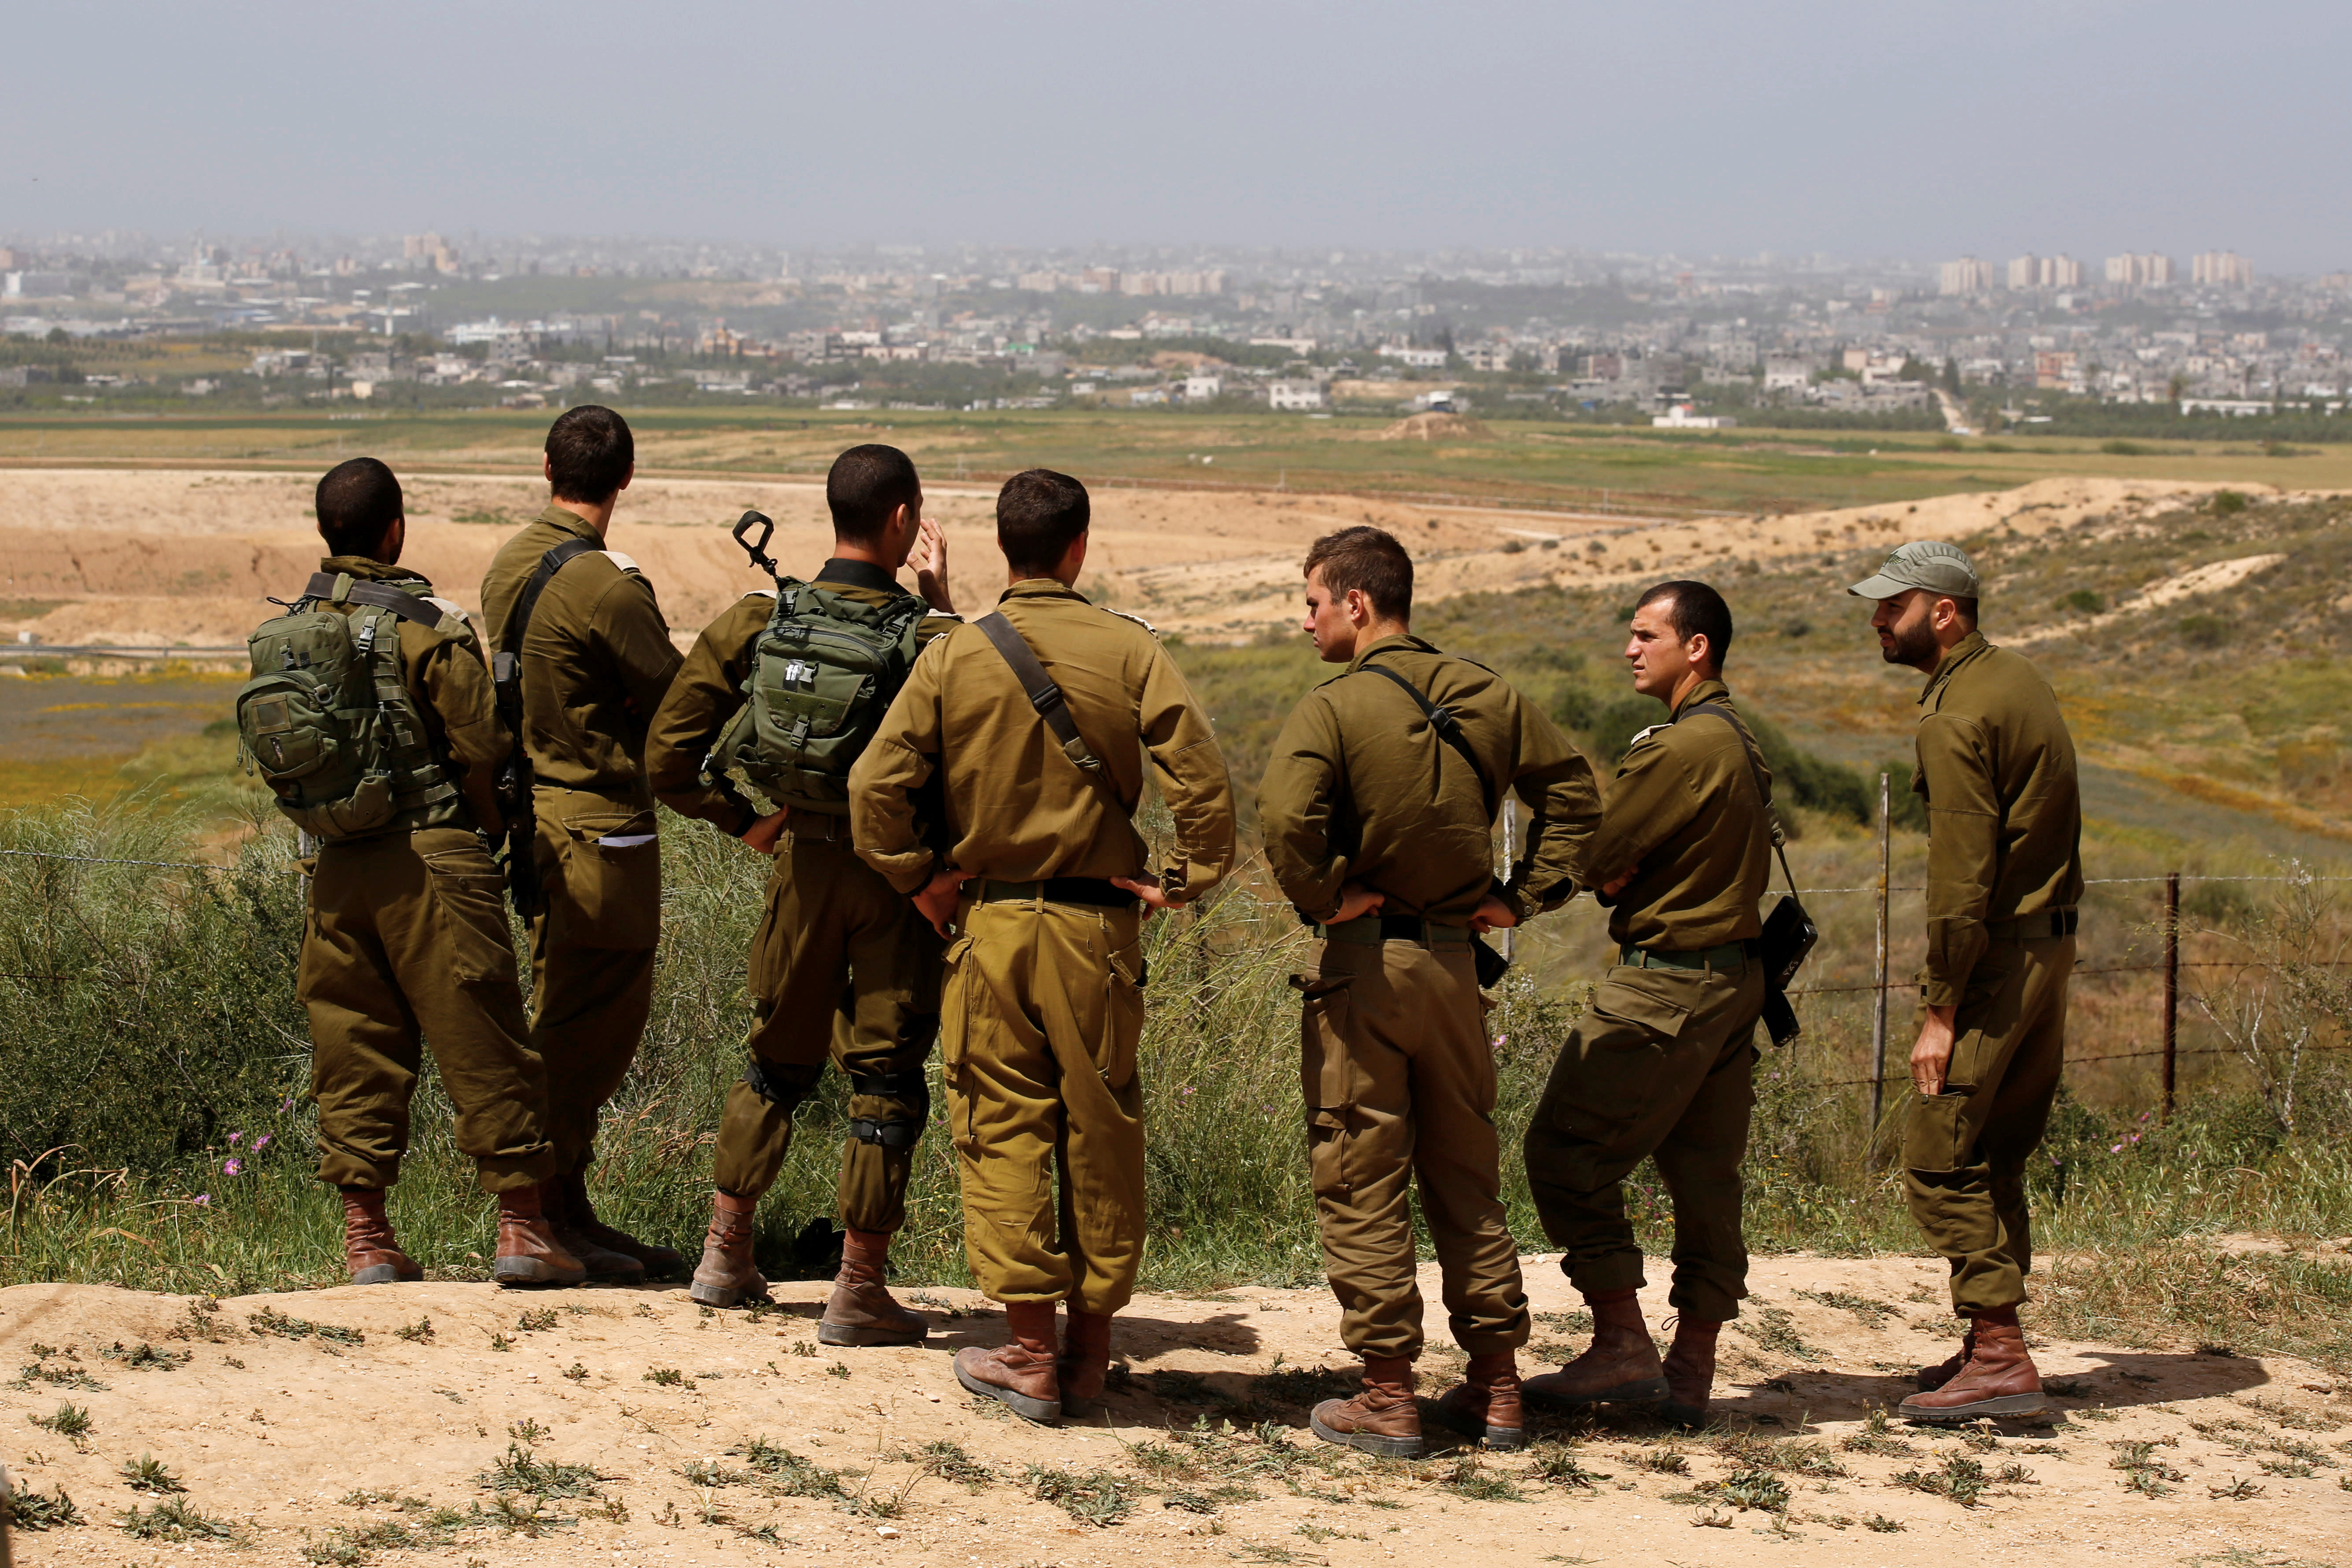 Israeli soldiers listen to a briefing on the Israeli side of the border with the northern Gaza Strip, Israel, March 29, 2018. (Reuters/Amir Cohen)